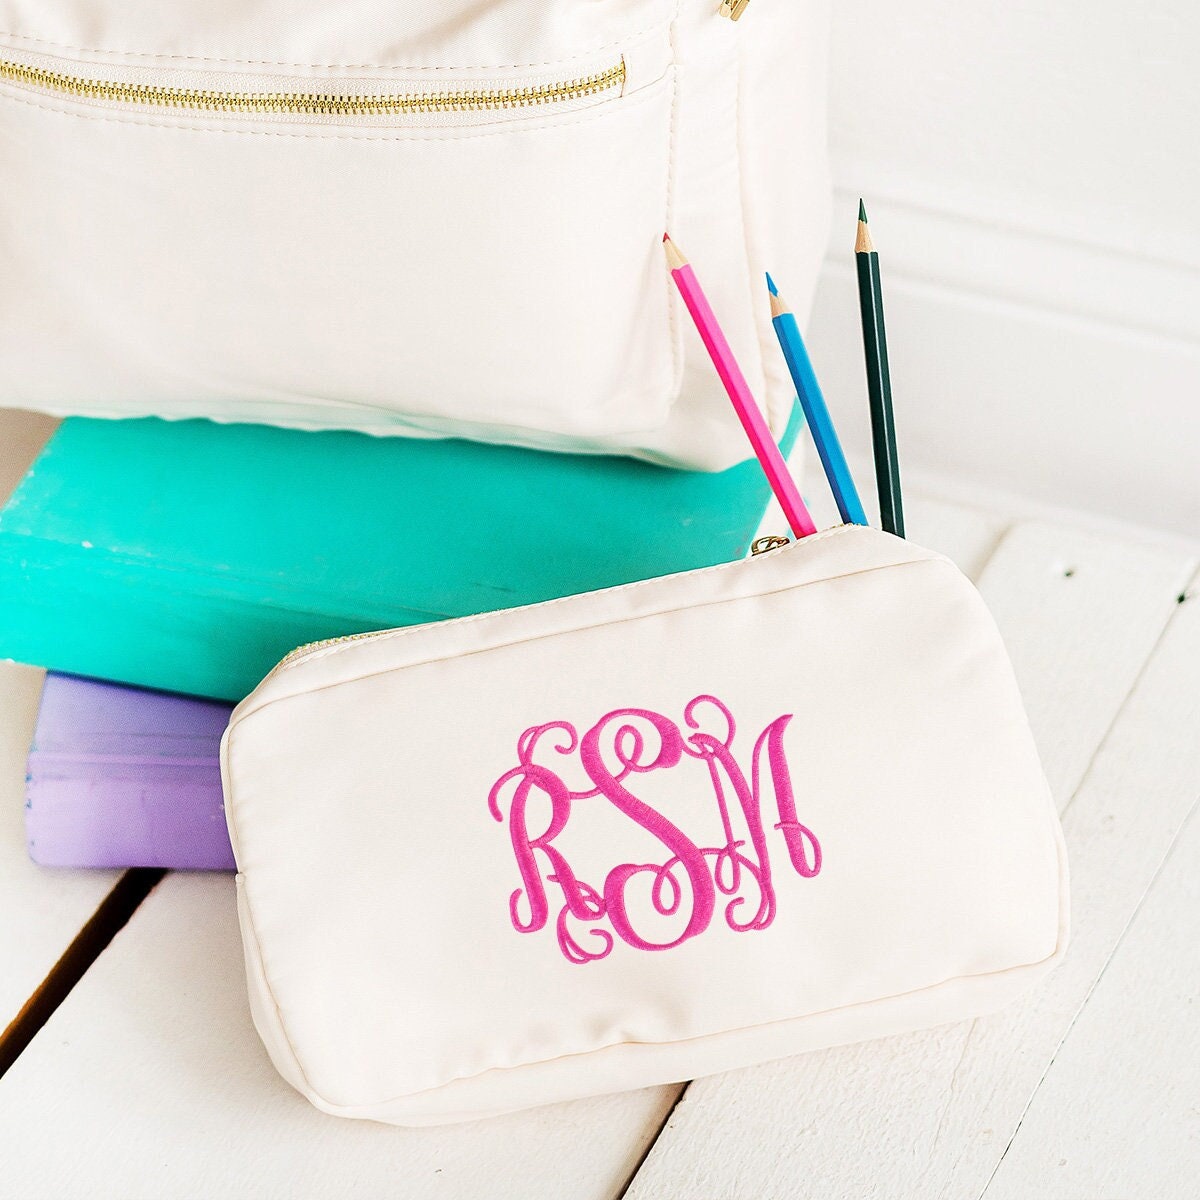 Large Capacity Pencil Bag, Pen Case, Office, School Supply, Stationery  Holder, Student Supply, Gift